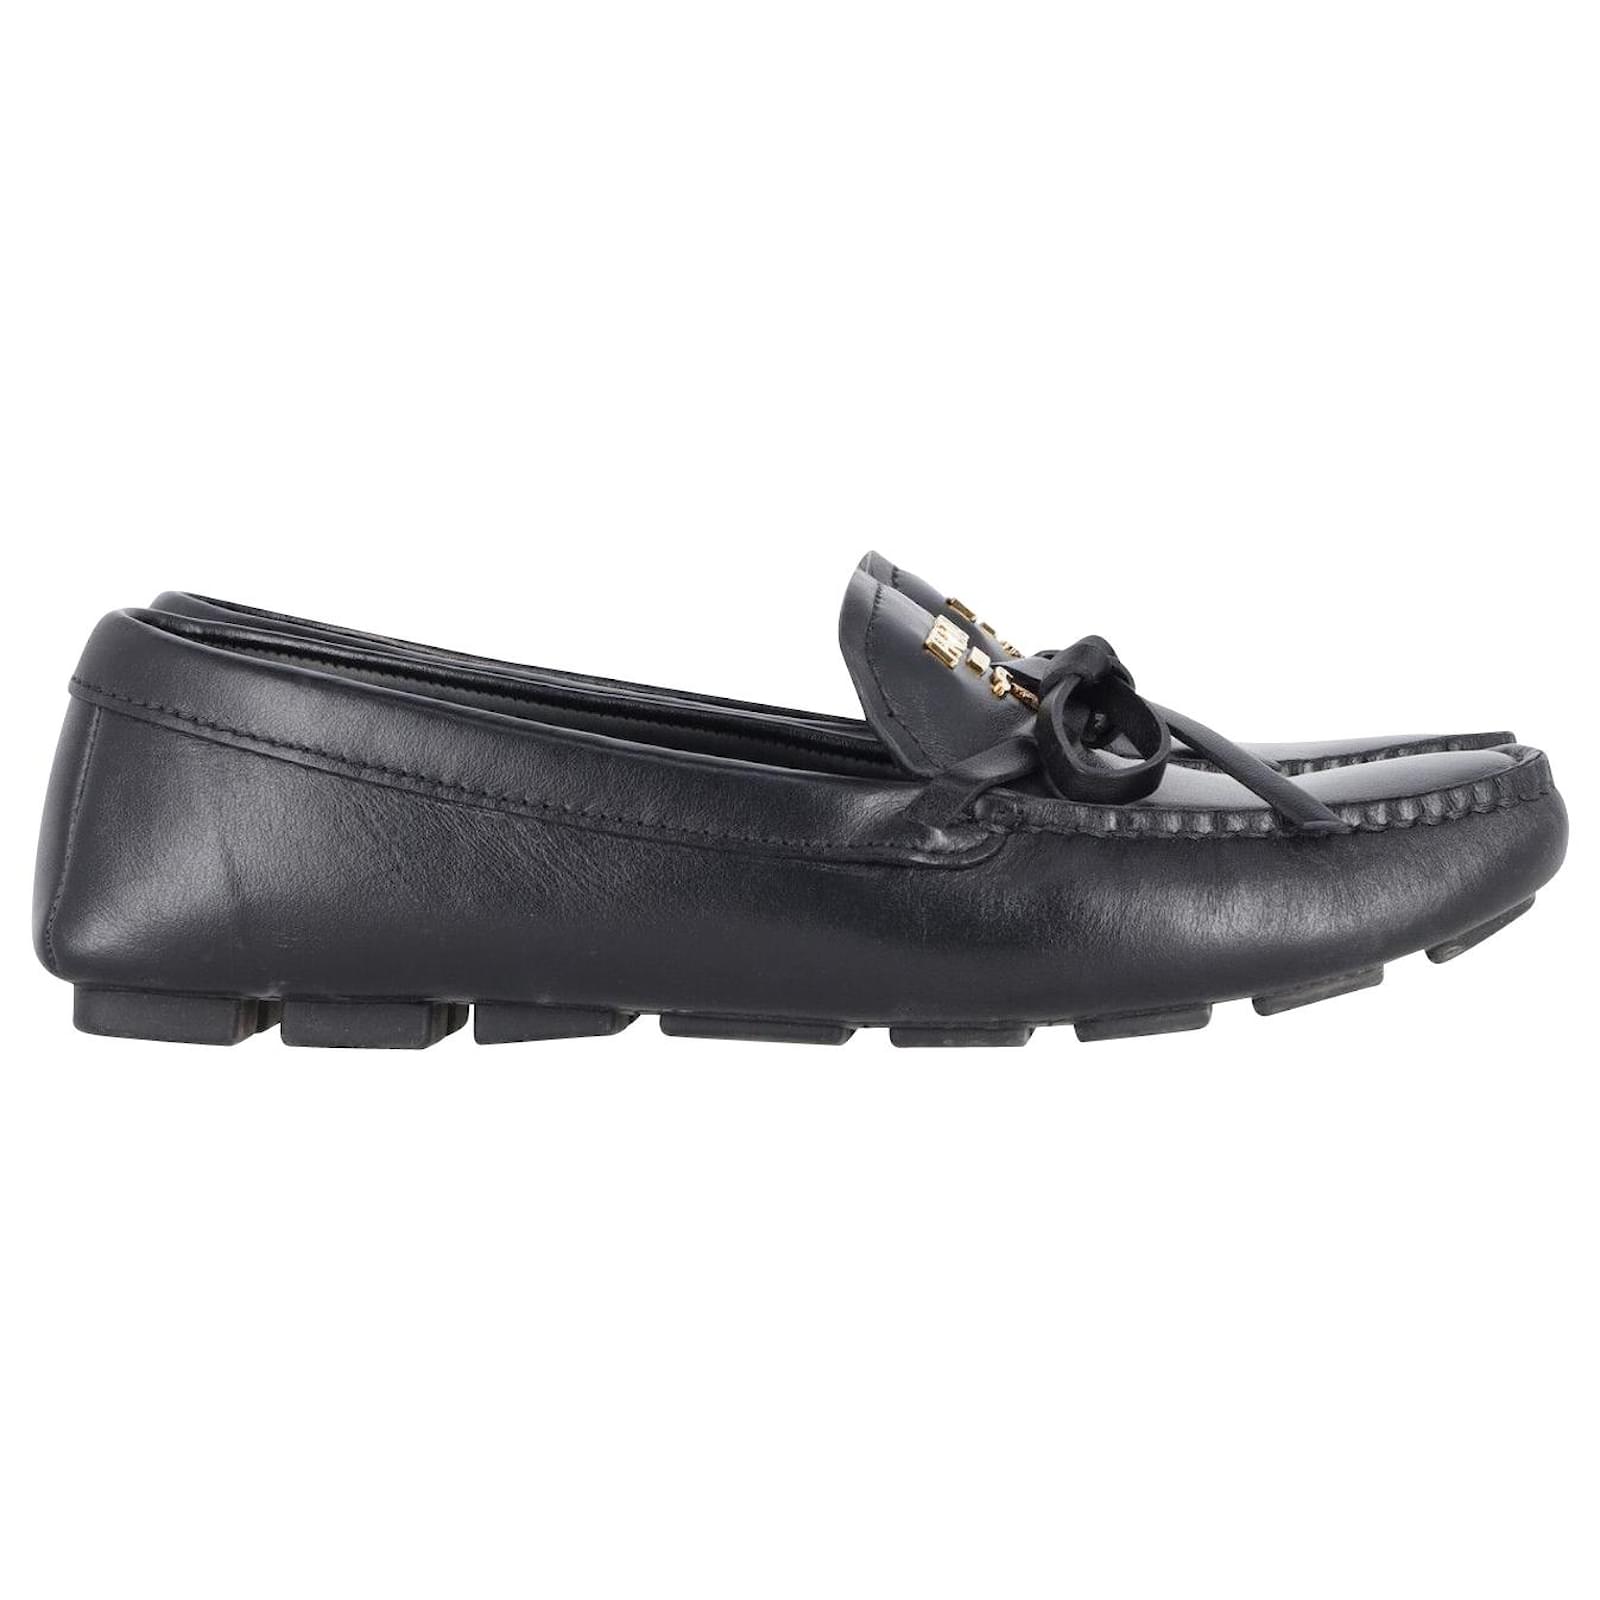 Prada Bow Detailed Driving Loafers in Black Leather Pony-style calfskin   - Joli Closet